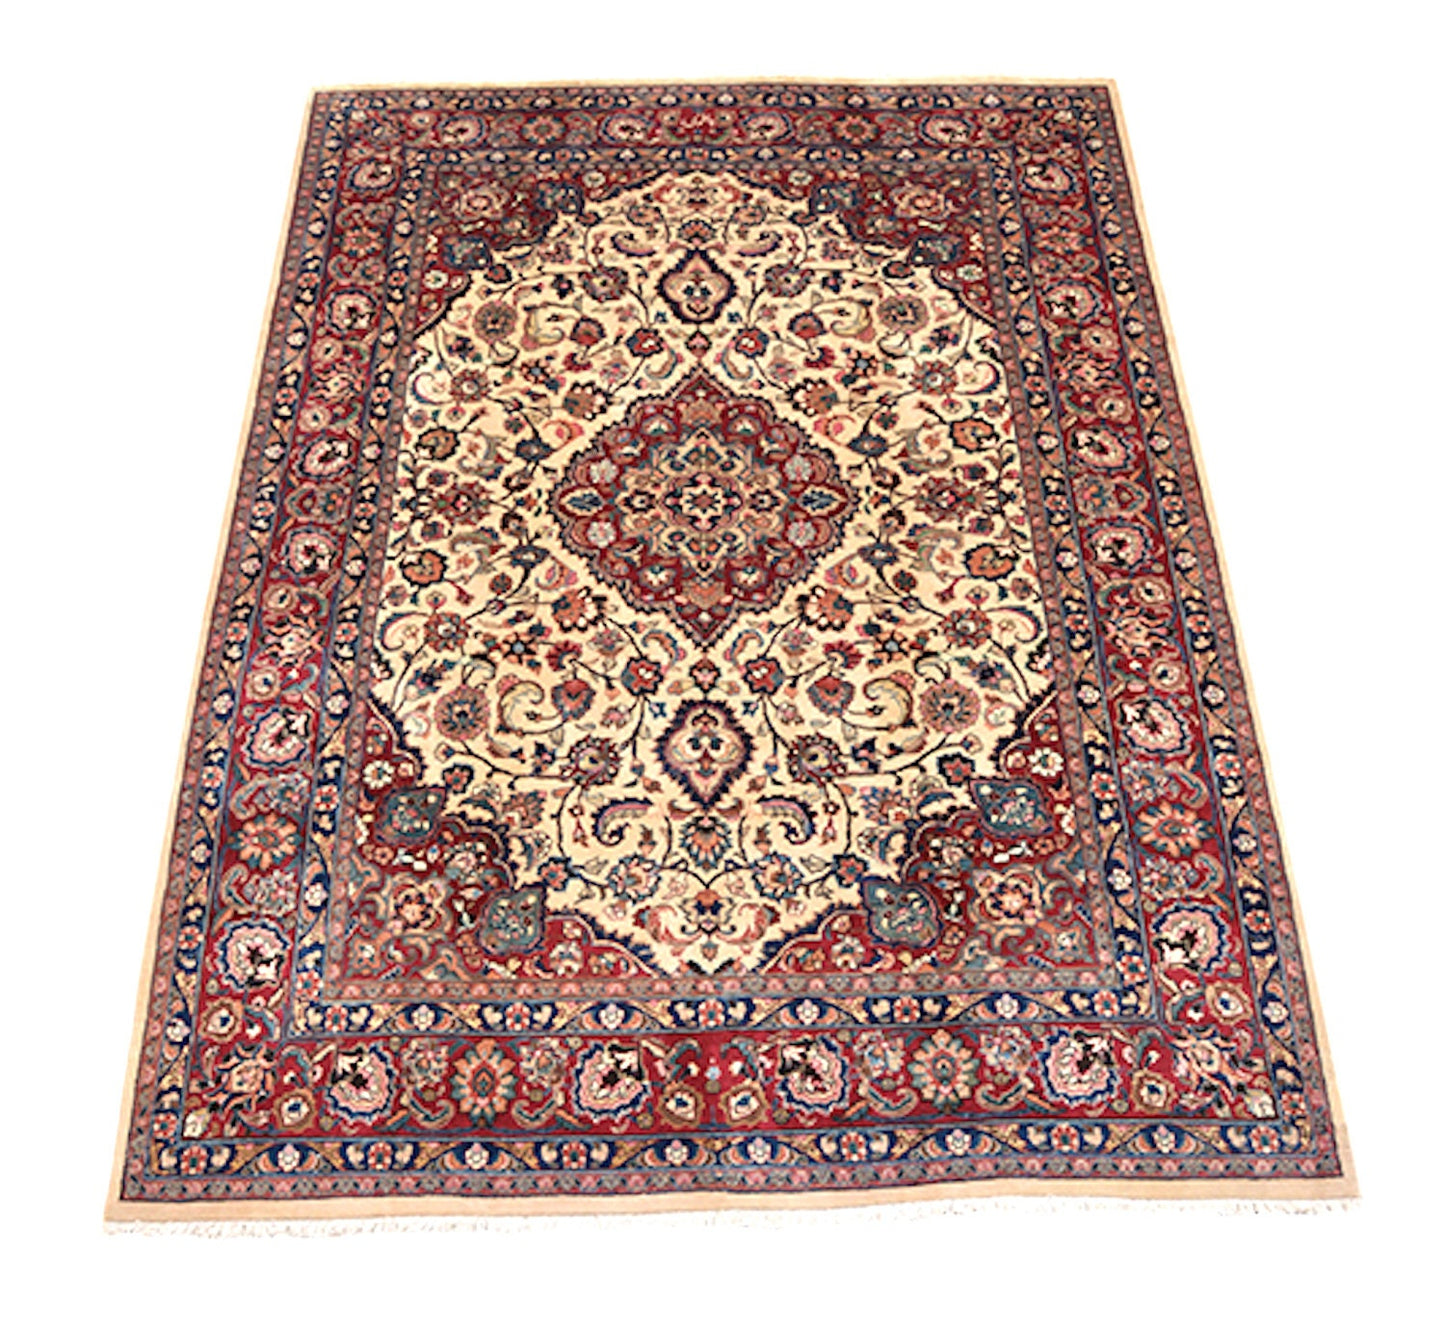 Large Red Persian 8x11 Rug with Beige Medallion | Hand Knotted with Oriental Design | Blue and Red Border | Luxury Wool & Cotton Rug